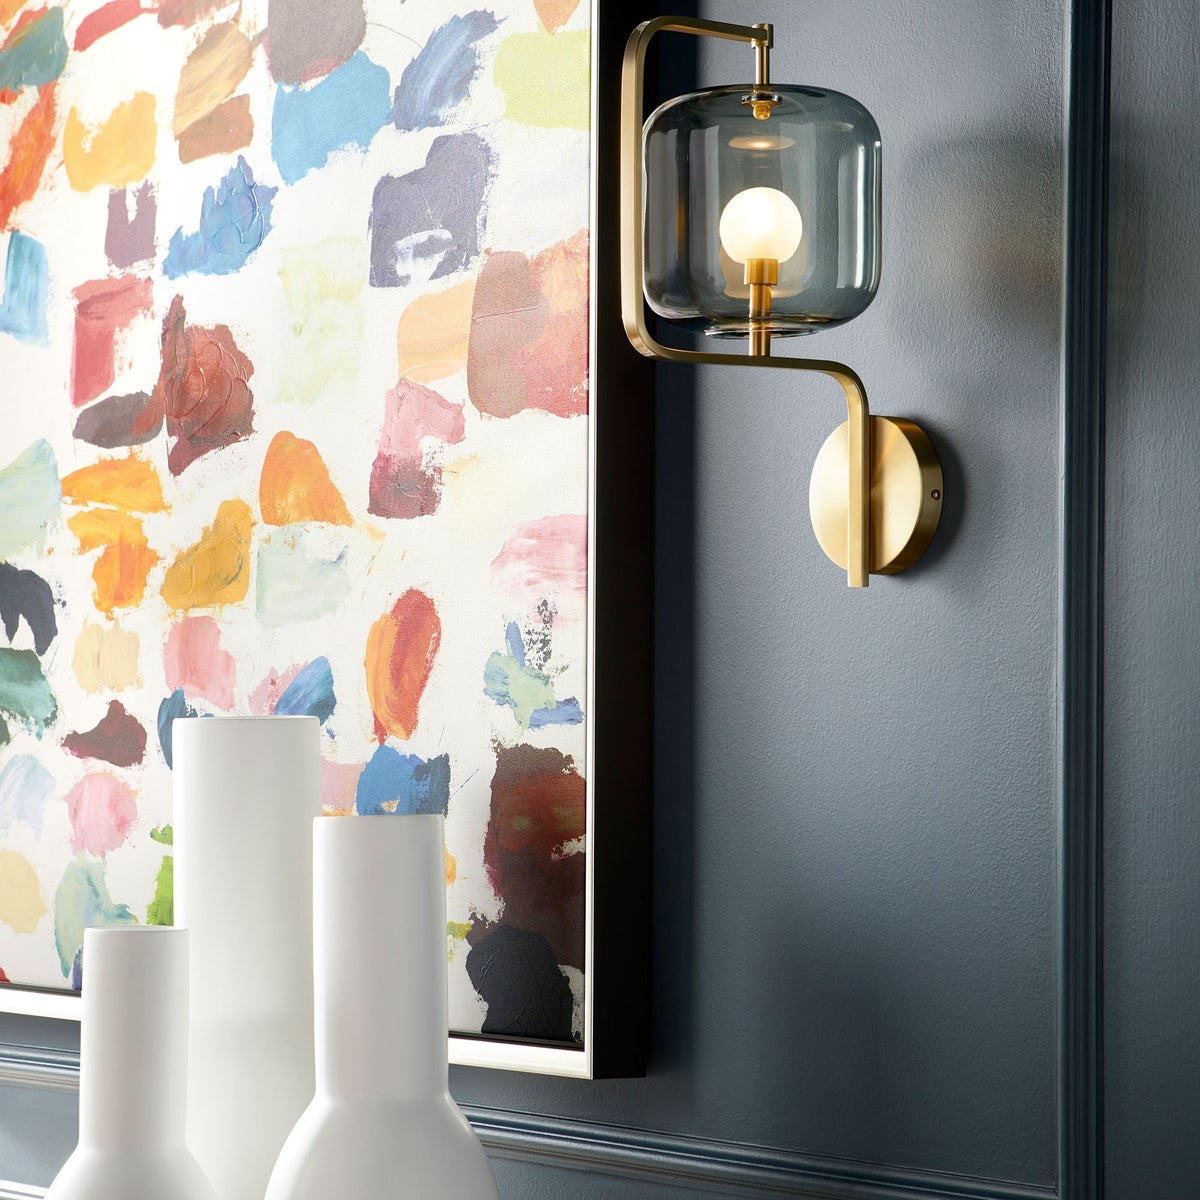 Isotope Wall Sconce | Aged Brass